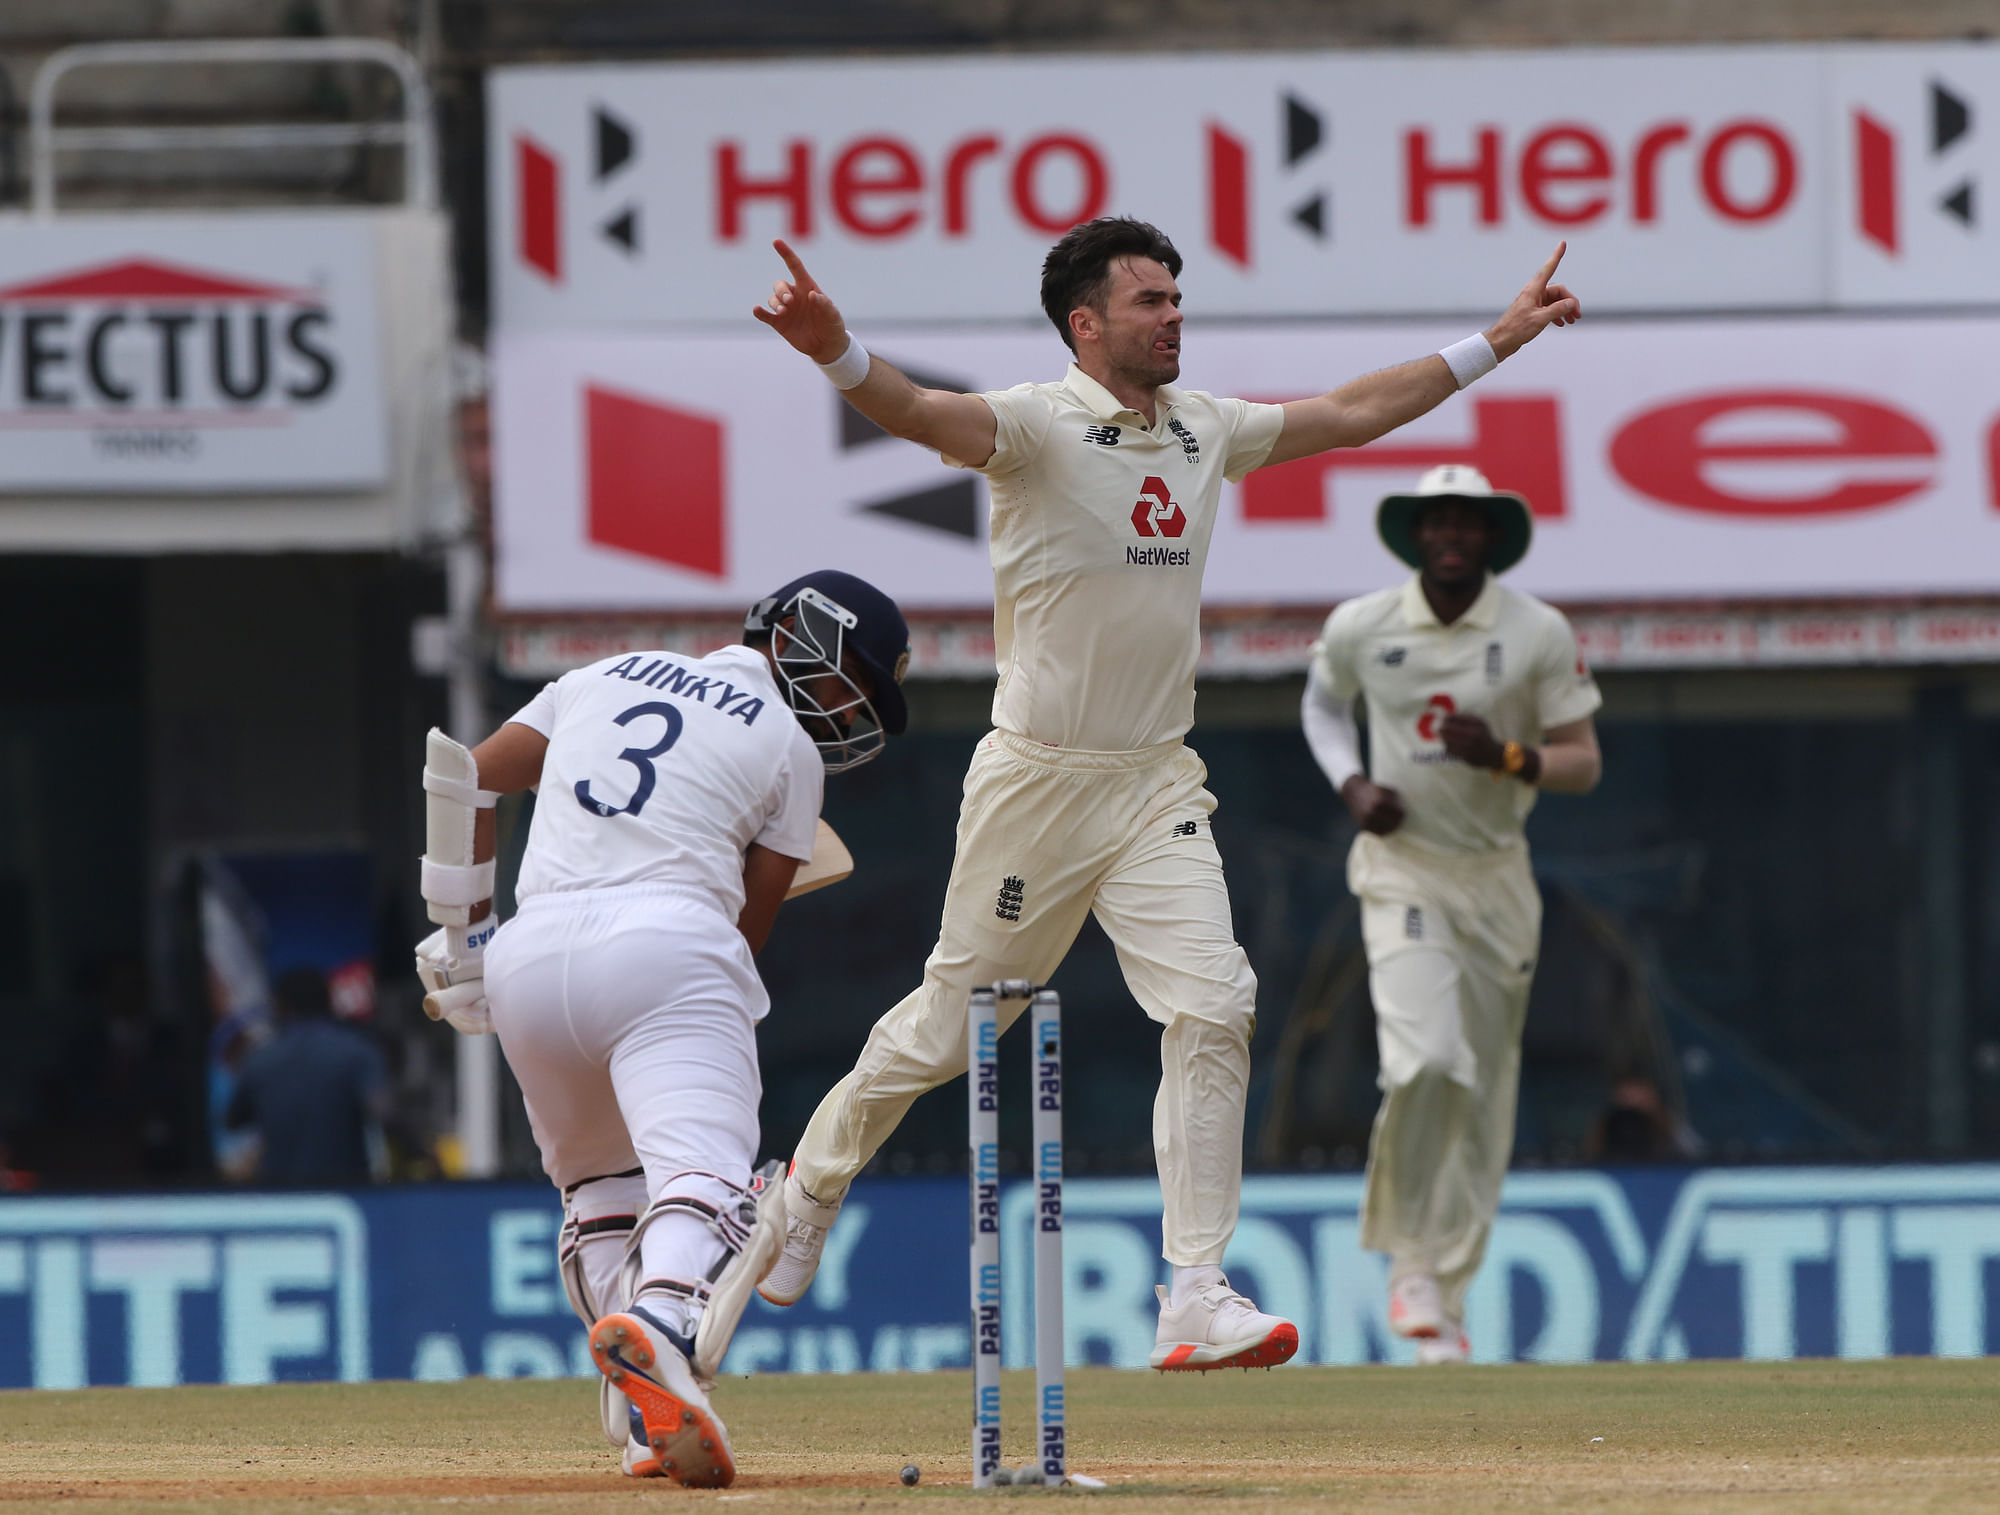 James Anderson of England celebrates the wicket of Ajinkya Rahane (Vice captain) of India during day five of the first test match between India and England.